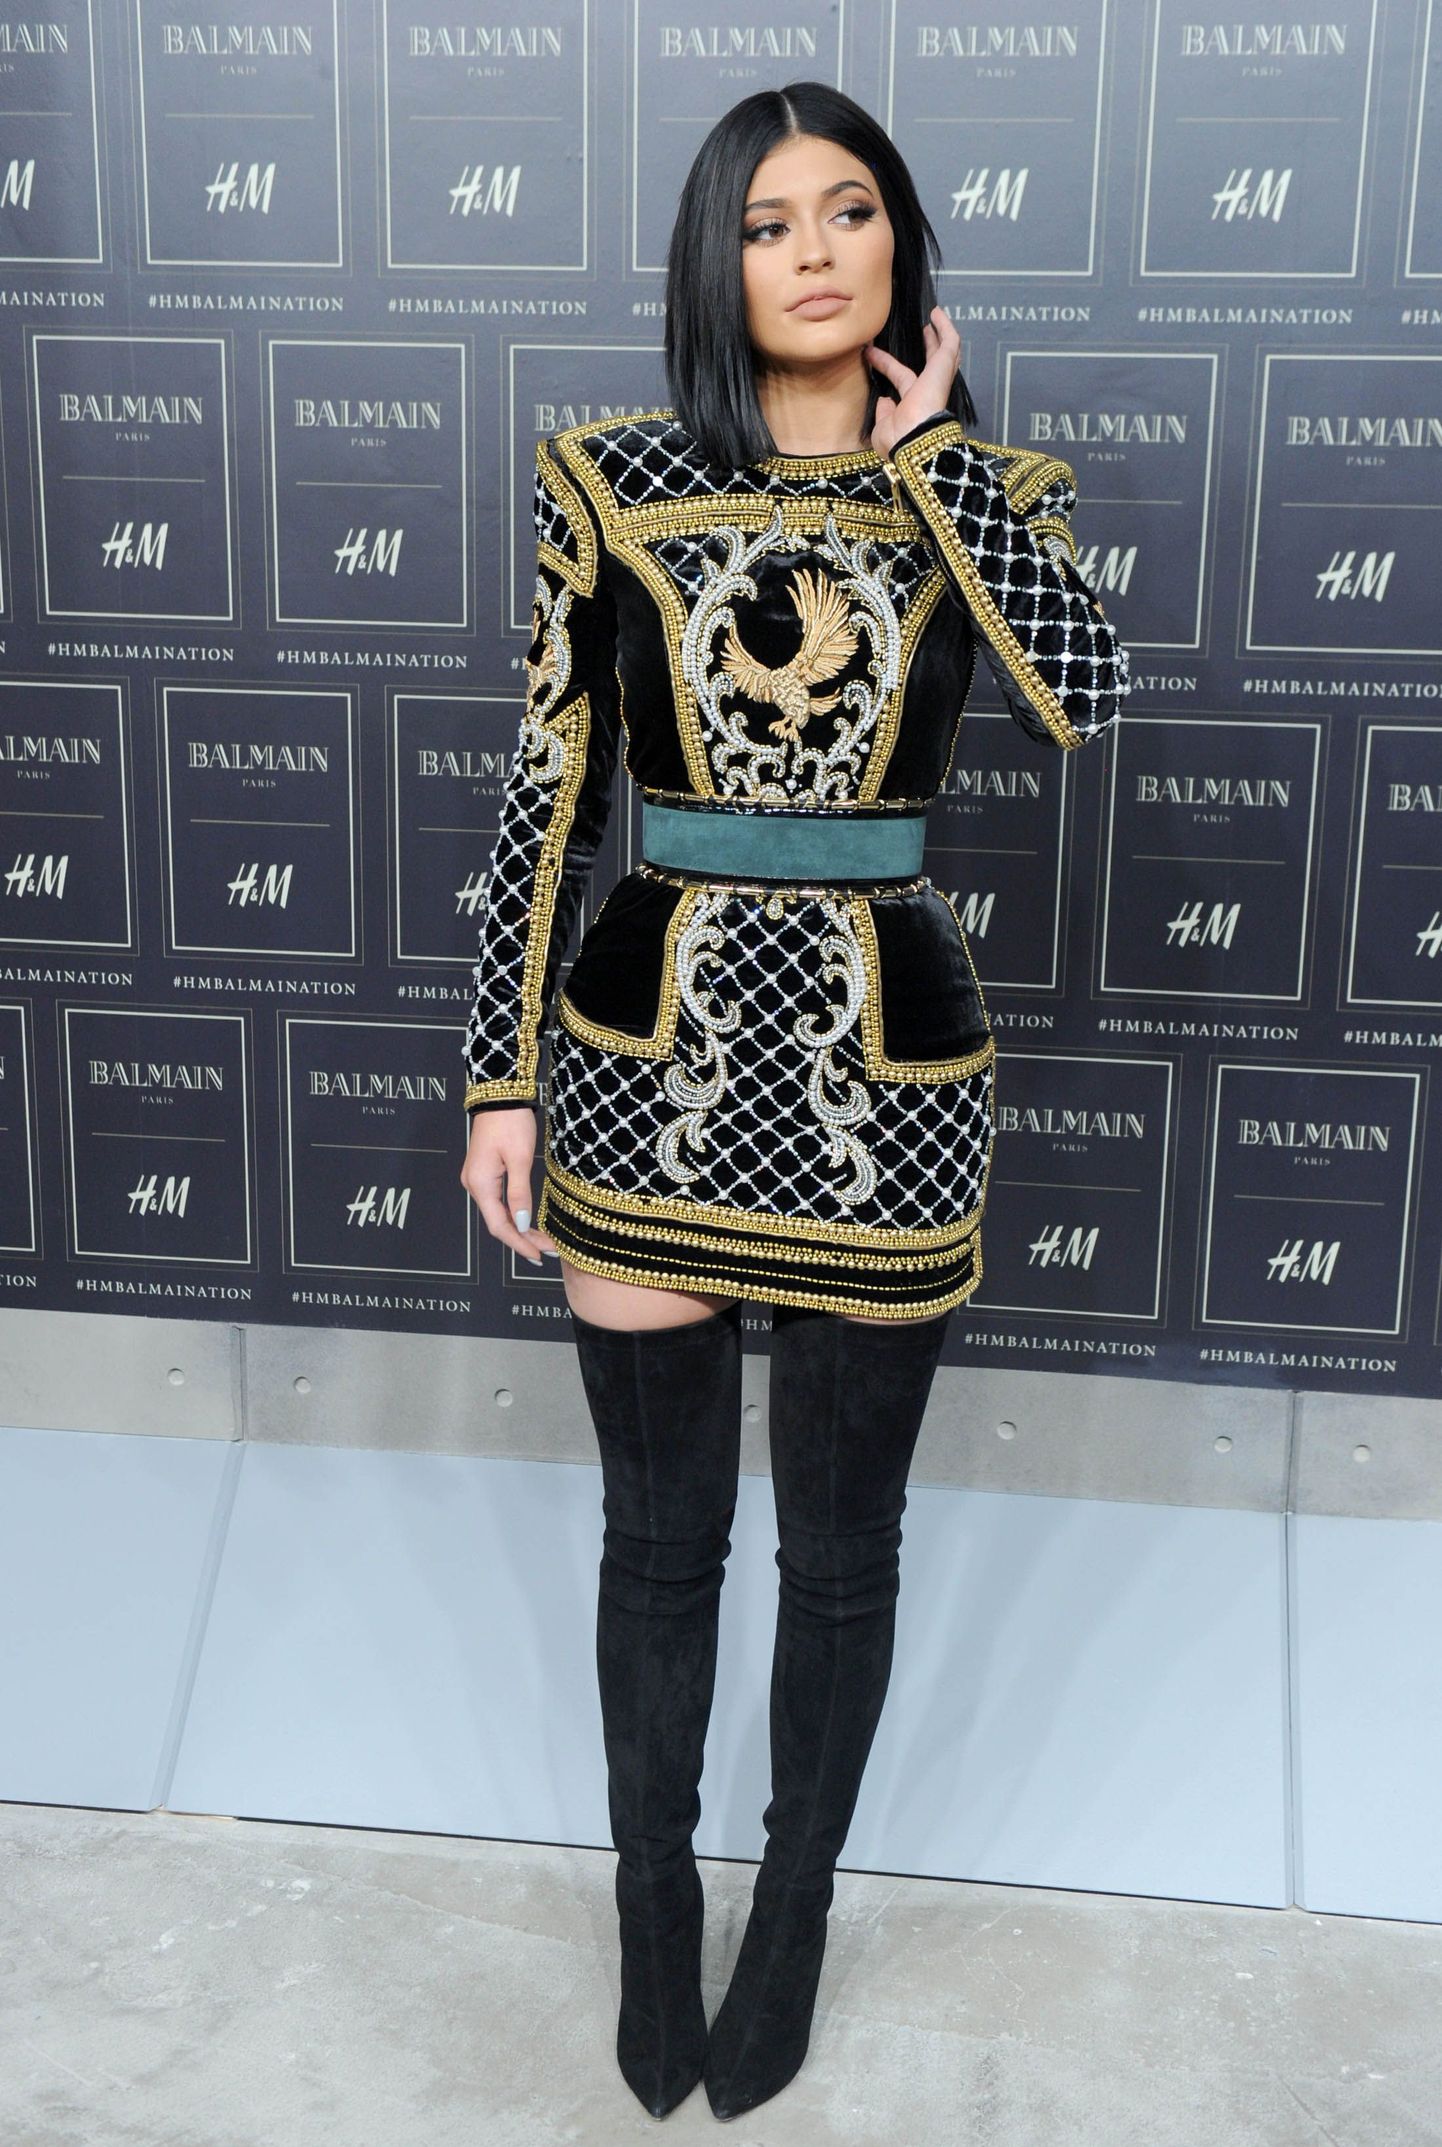 Kylie Jenner at Balmain's H&M Fashion Show held in New York